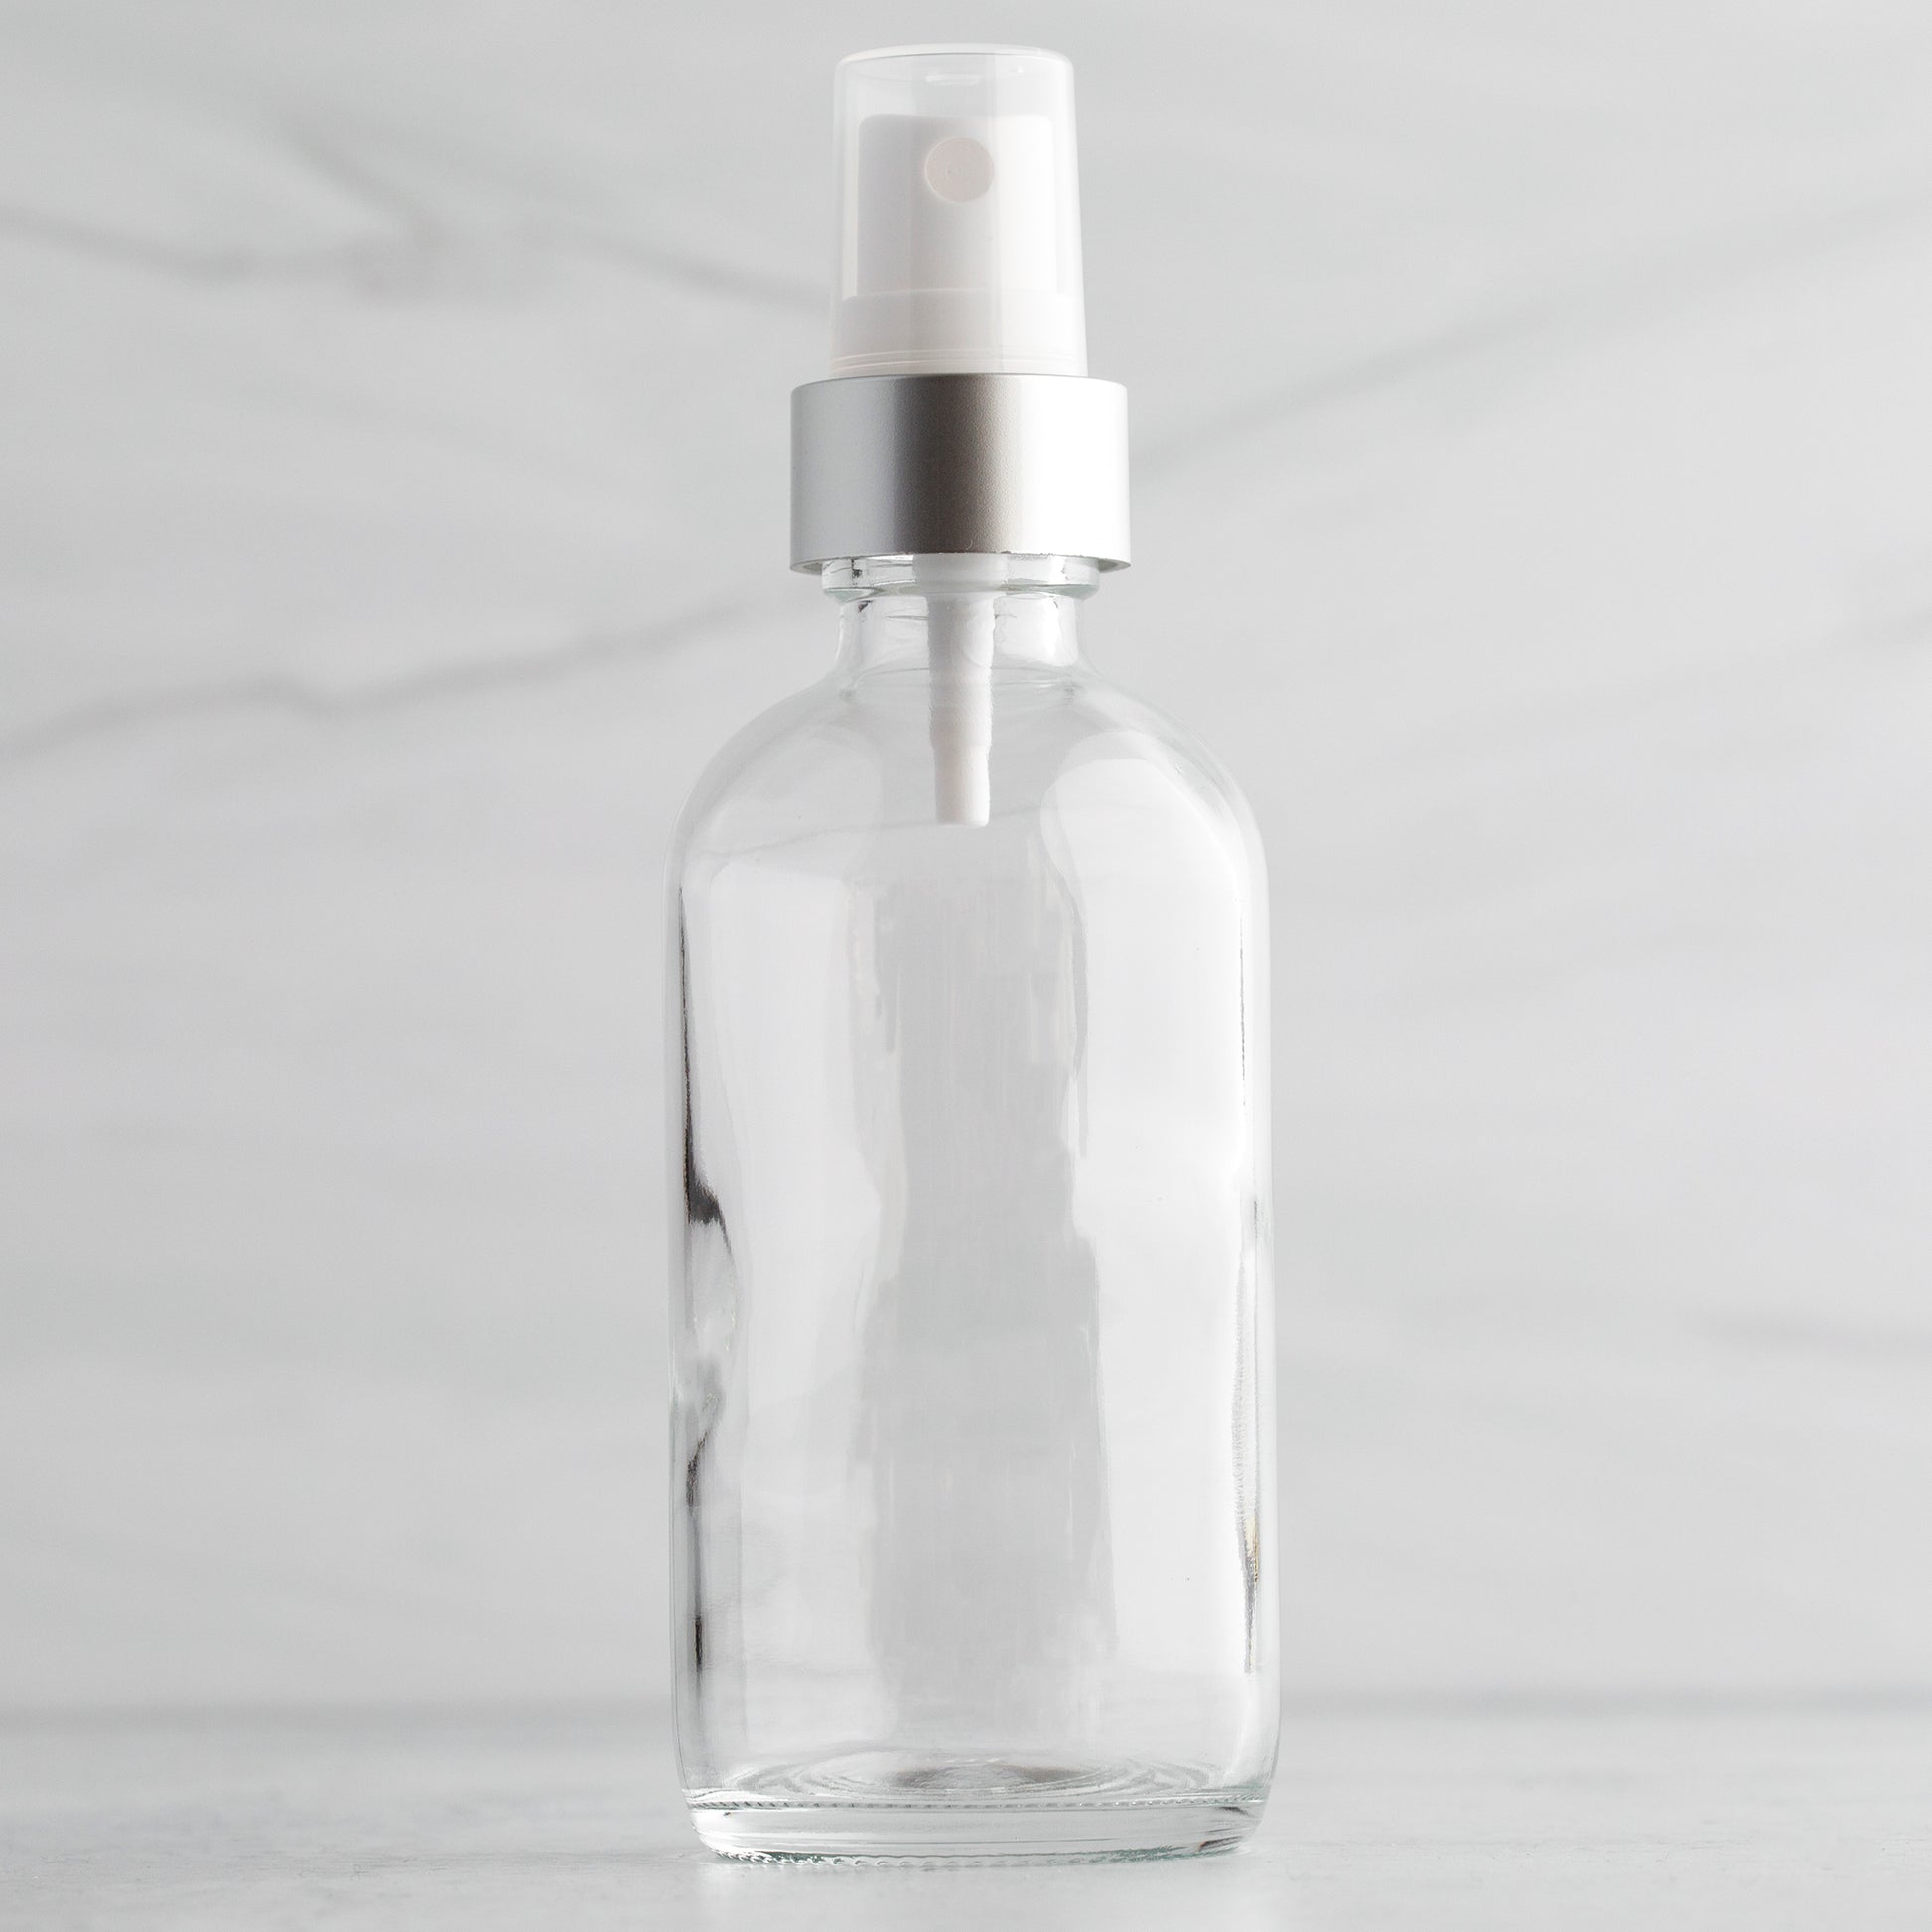 4 oz Clear Glass Bottle with White Mister with Brushed Aluminum Shell